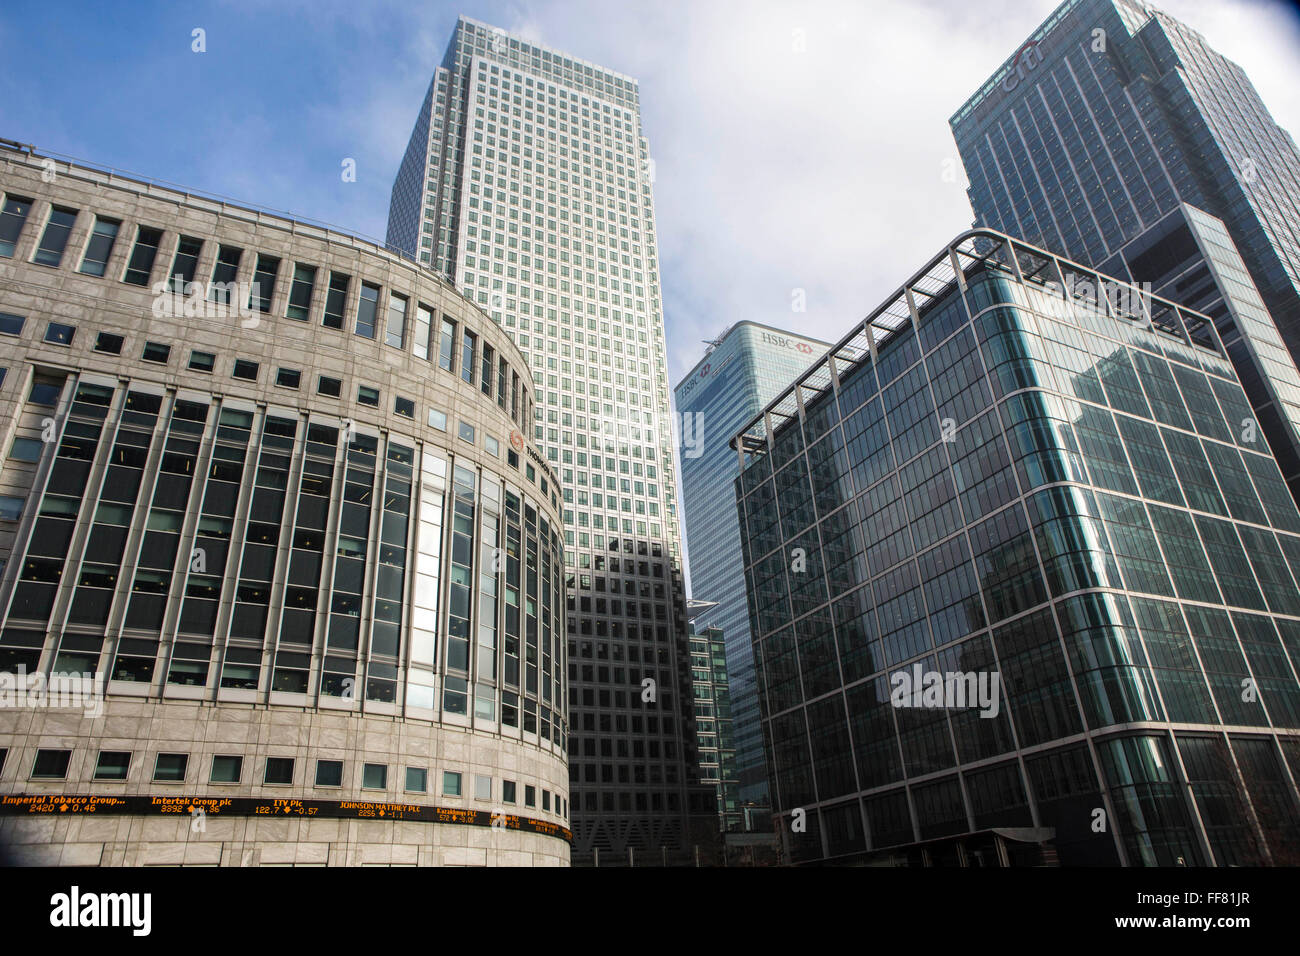 Street view from  of the iconic office buildings in the financial district of Canary Wharf, London, England, United Kingdom.   The famous One Canada Square skyscraper stands above the Thompson Reuters and Citi buildings. Stock Photo